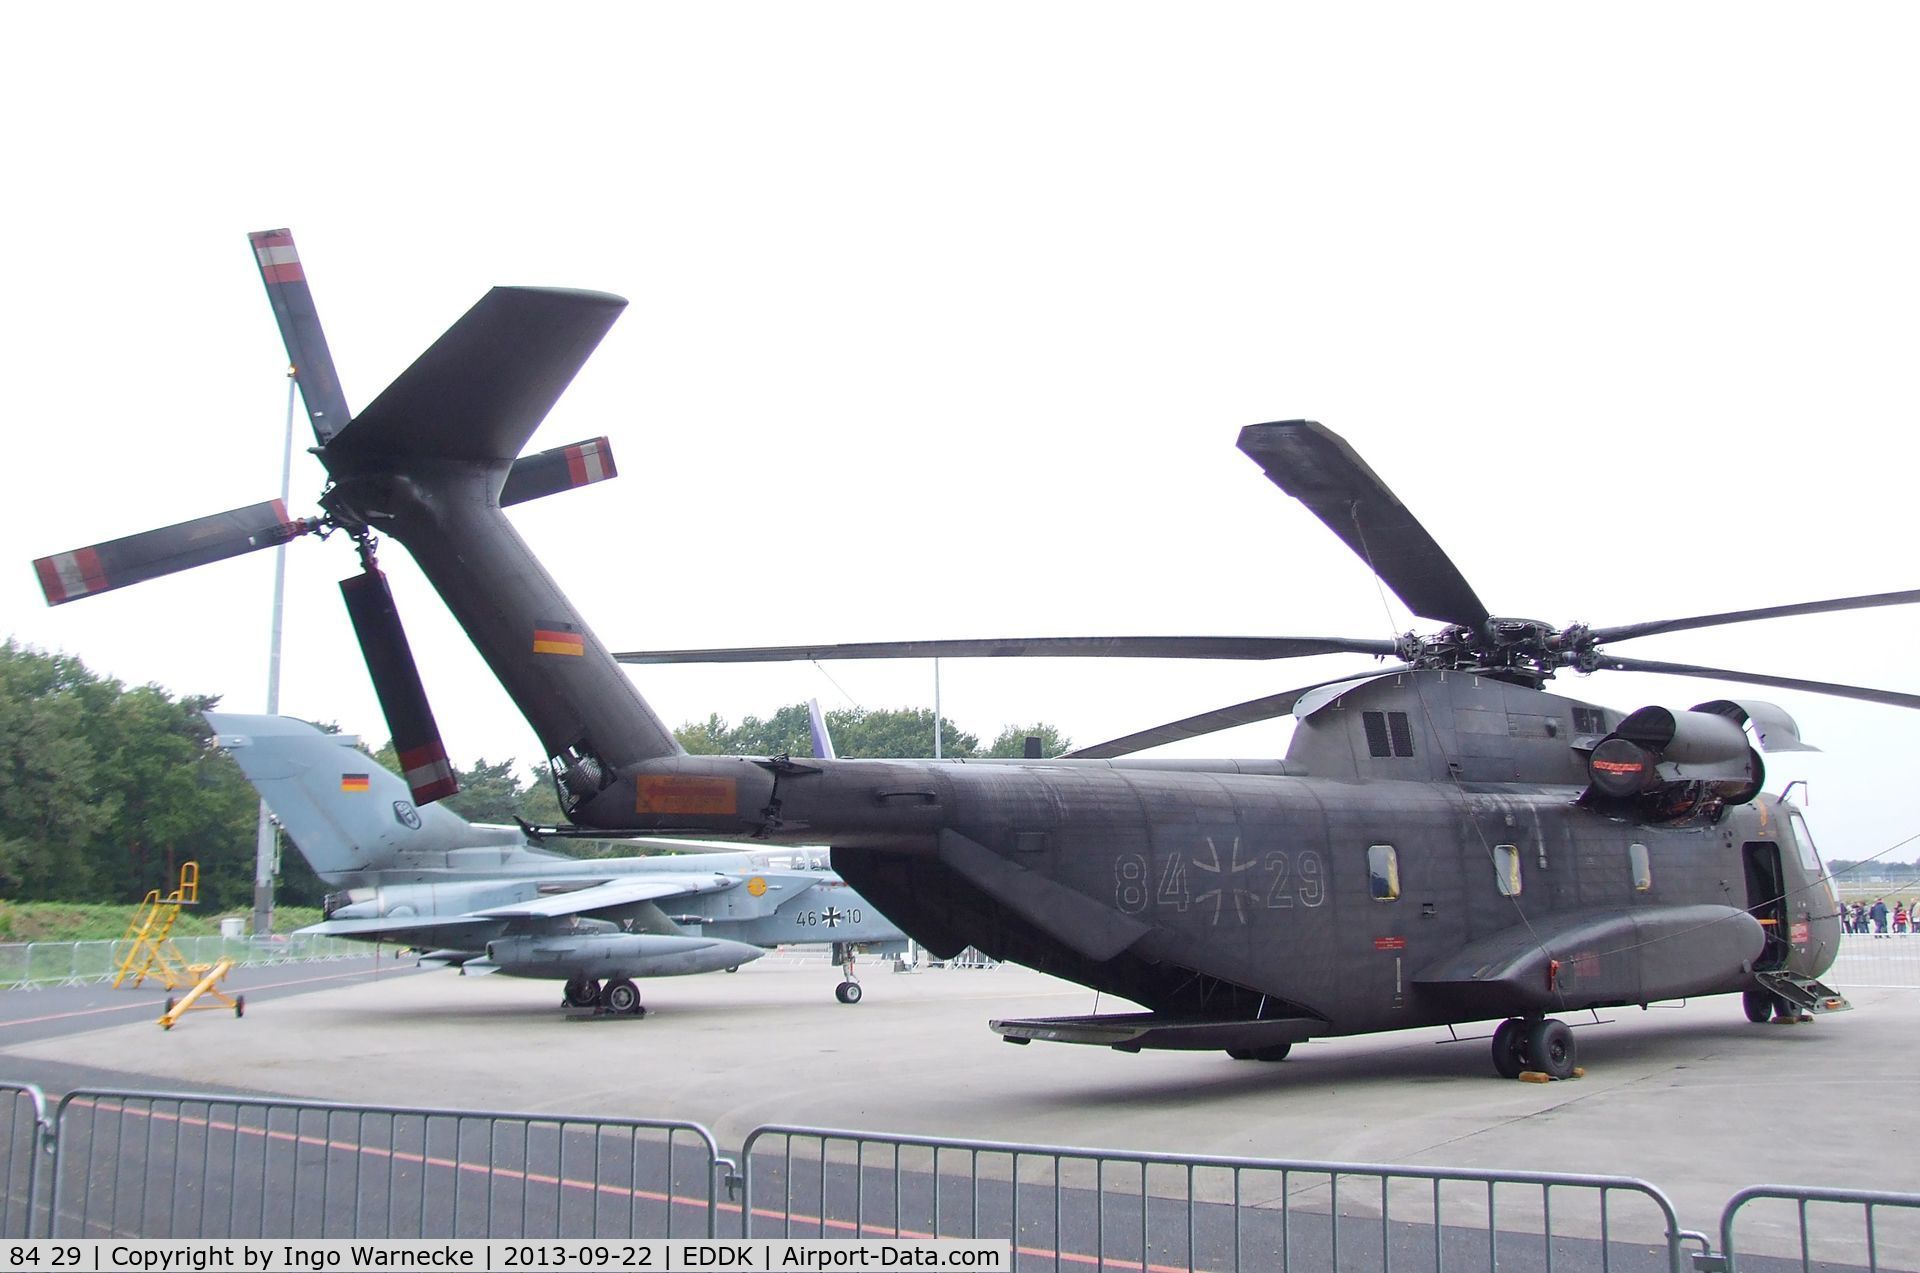 84 29, Sikorsky (VFW-Fokker) CH-53G C/N V65-027, Sikorsky (VFW-Fokker) CH-53G of the German Air Force (Luftwaffe) at the DLR 2013 air and space day on the side of Cologne airport